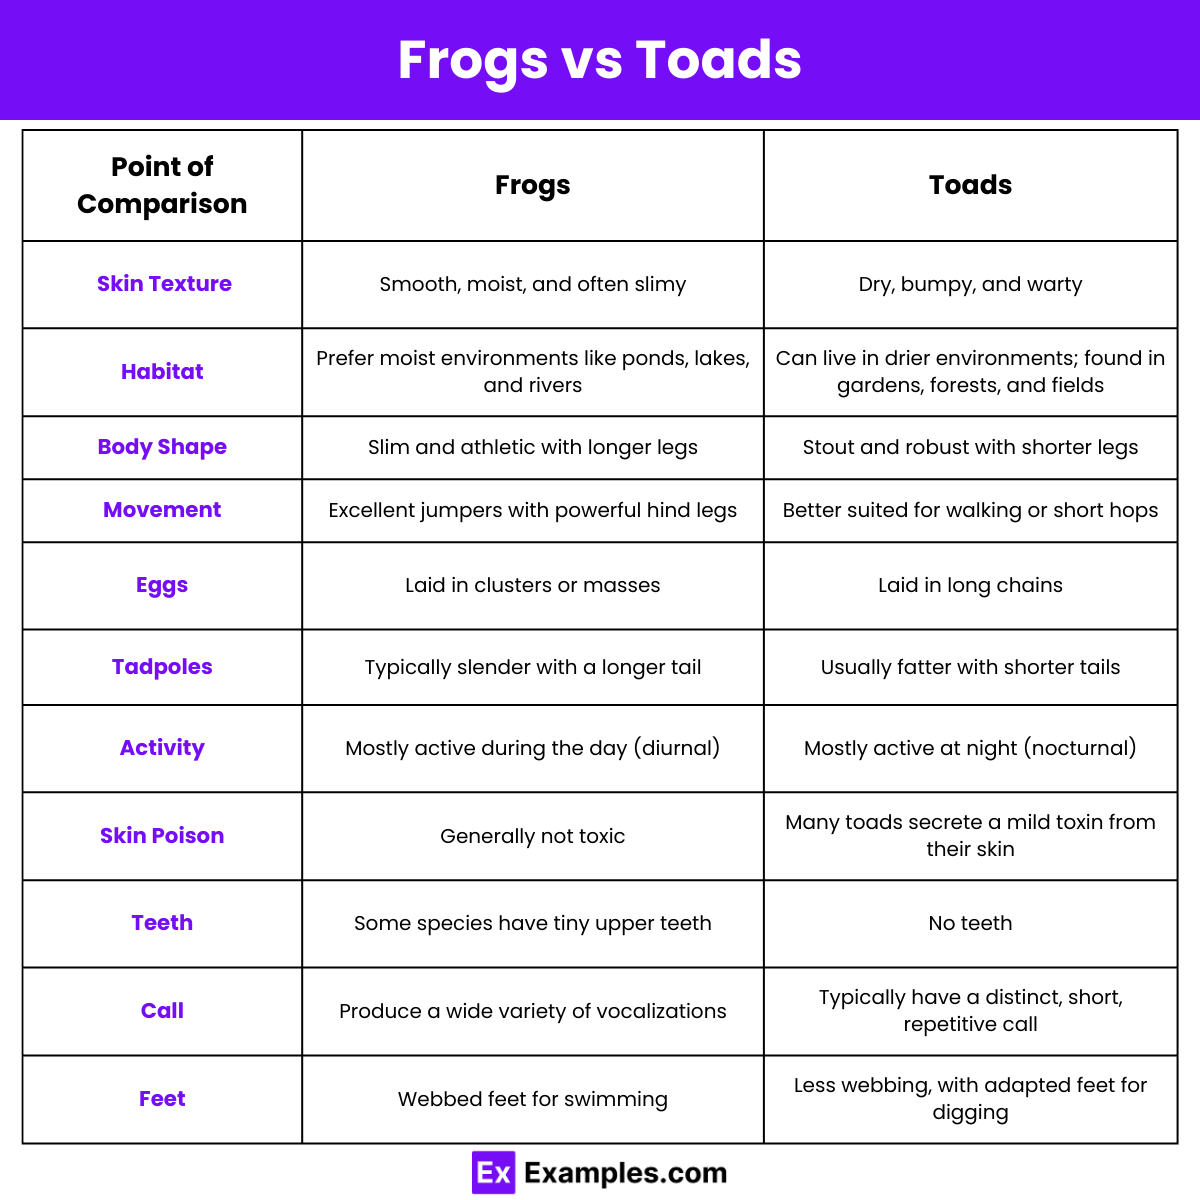 Differences Between Frogs and Toads